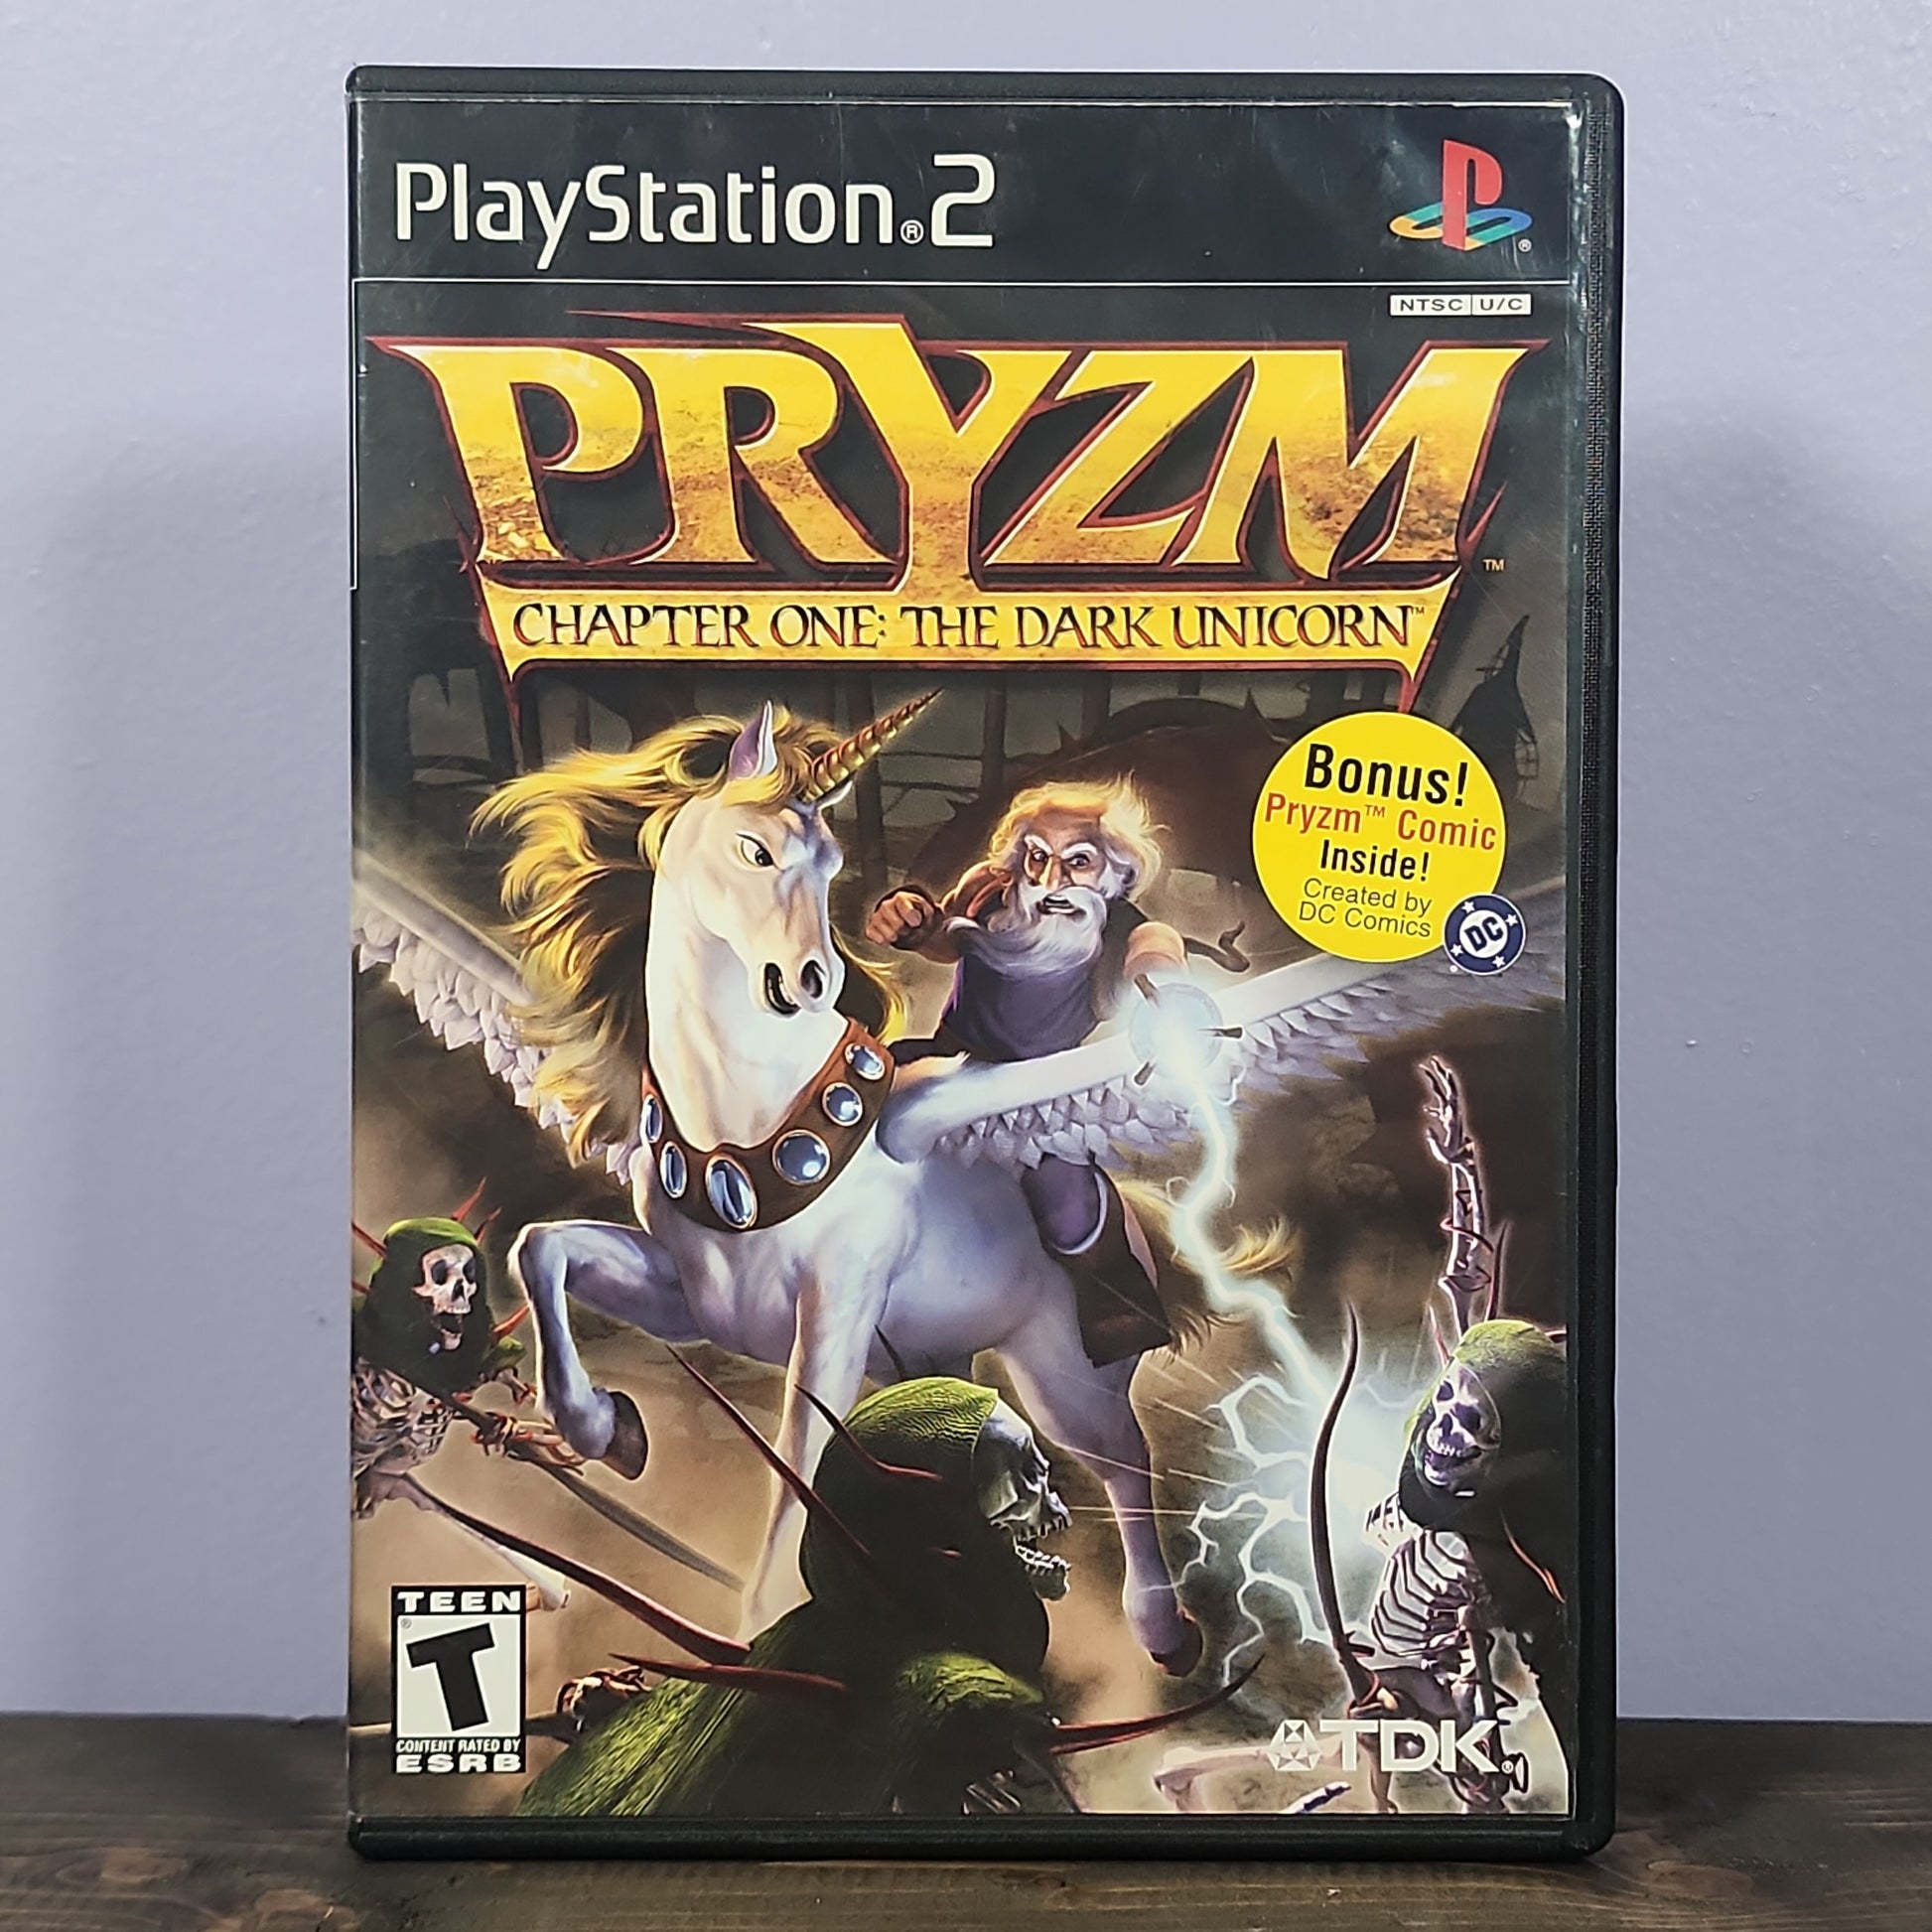 Playstation 2 - Pryzm Chapter One: The Dark Unicorn Retrograde Collectibles Action, Adventure, CIB, Digital Illusions, Fantasy, Playstation 2, PS2, T Rated, TDK Mediactive Preowned Video Game 